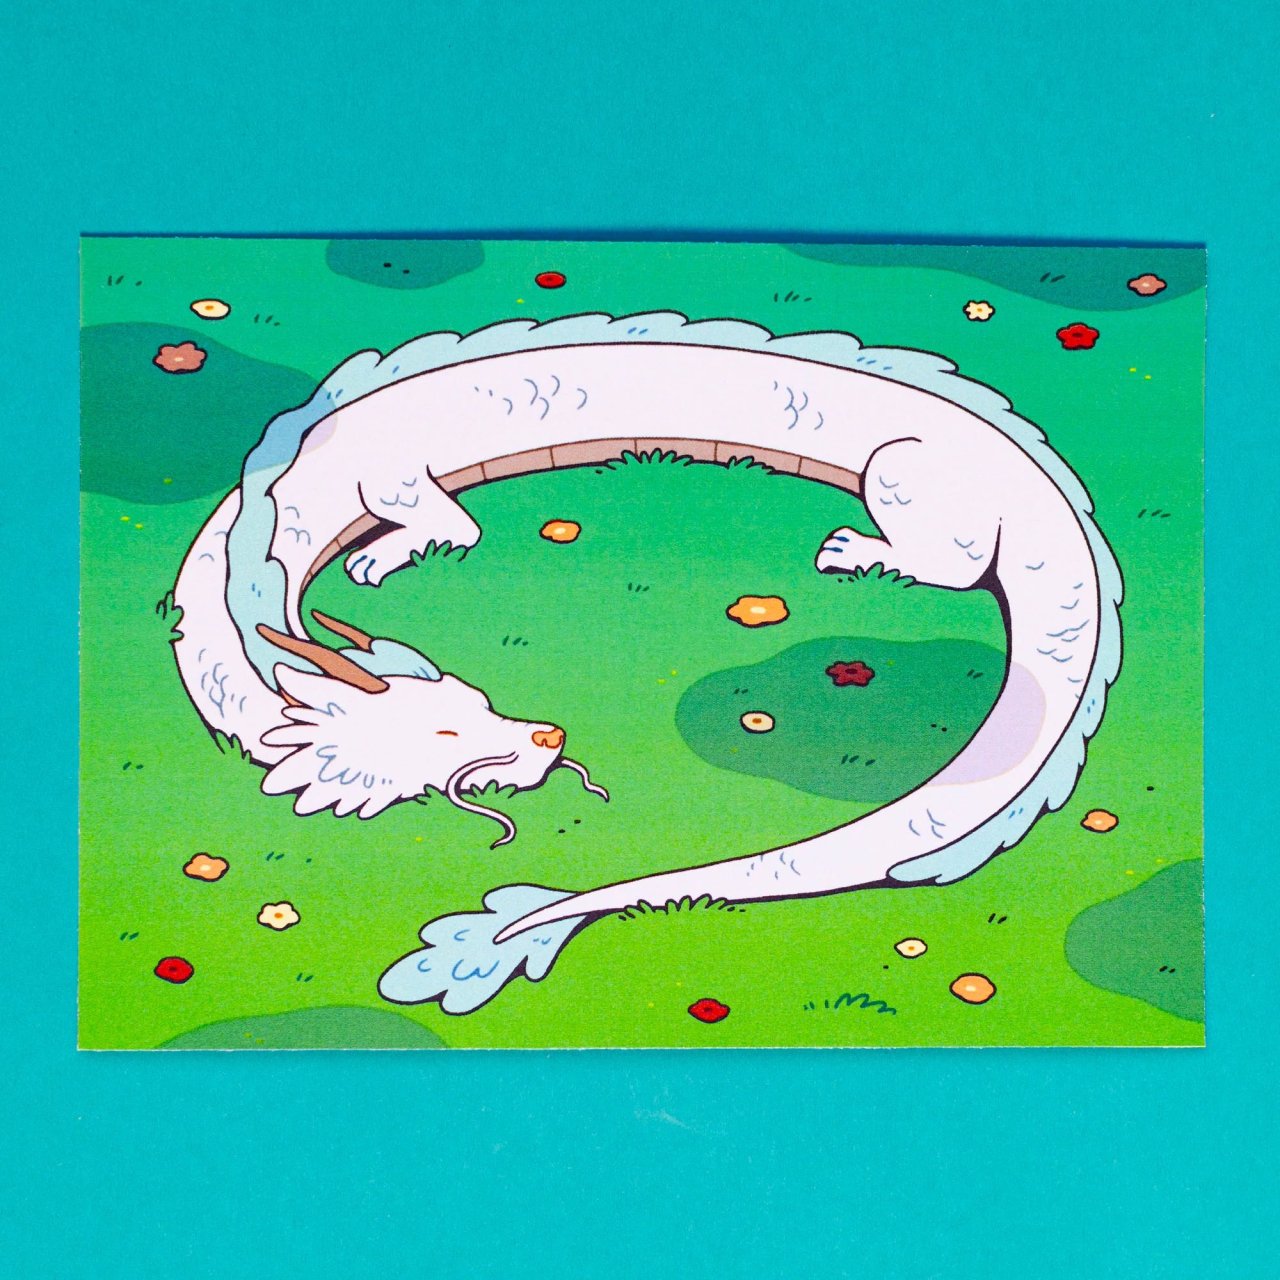 Art print depicting a Chinese dragon curled up in a meadow, surrounded by small wildflowers.